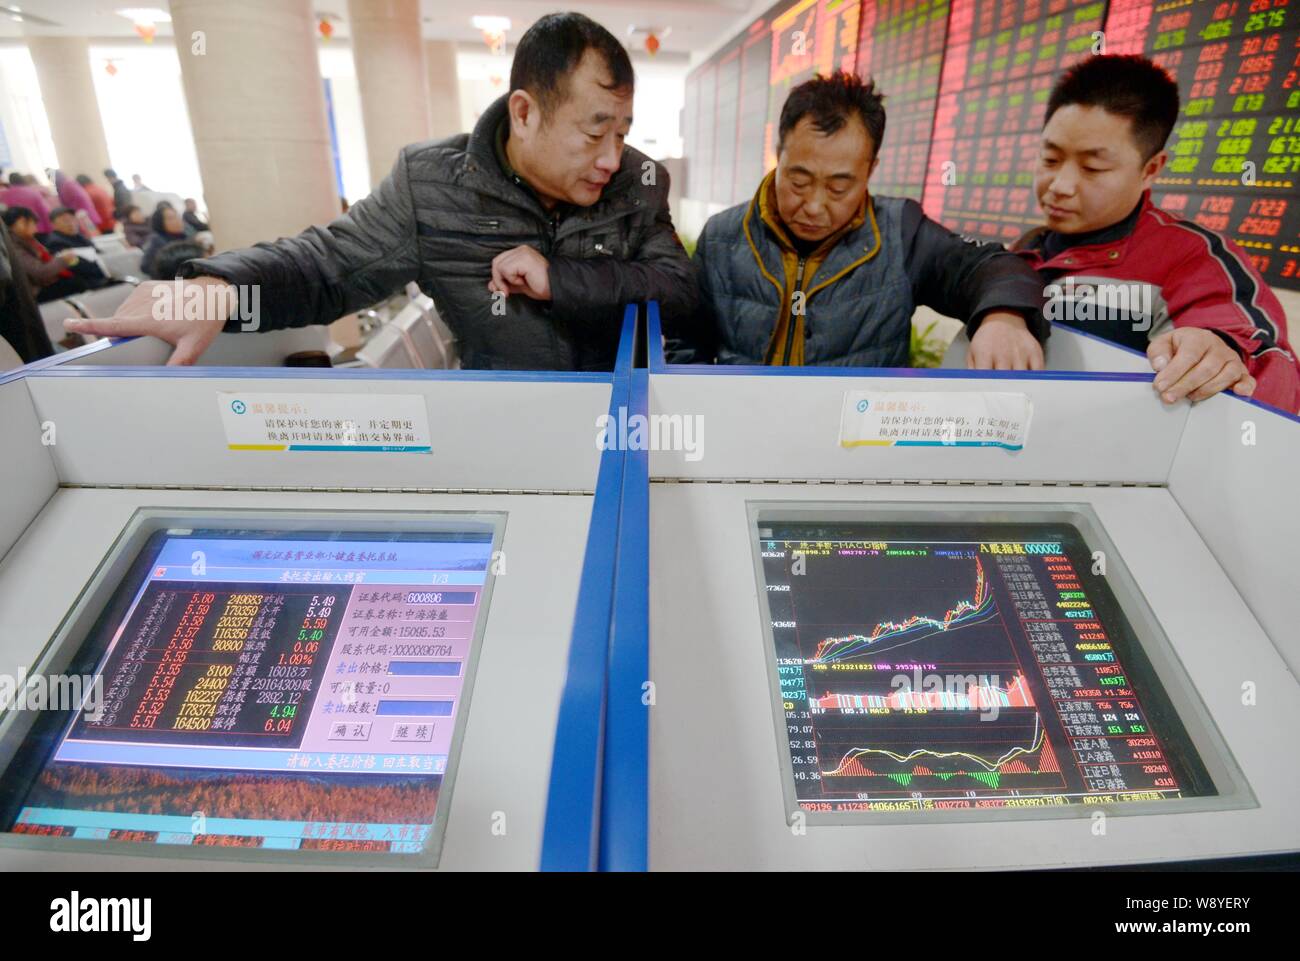 Chinese investors watch computer displays showing prices of shares (red for price rising and green for price falling) and the Shanghai Composite Index Stock Photo